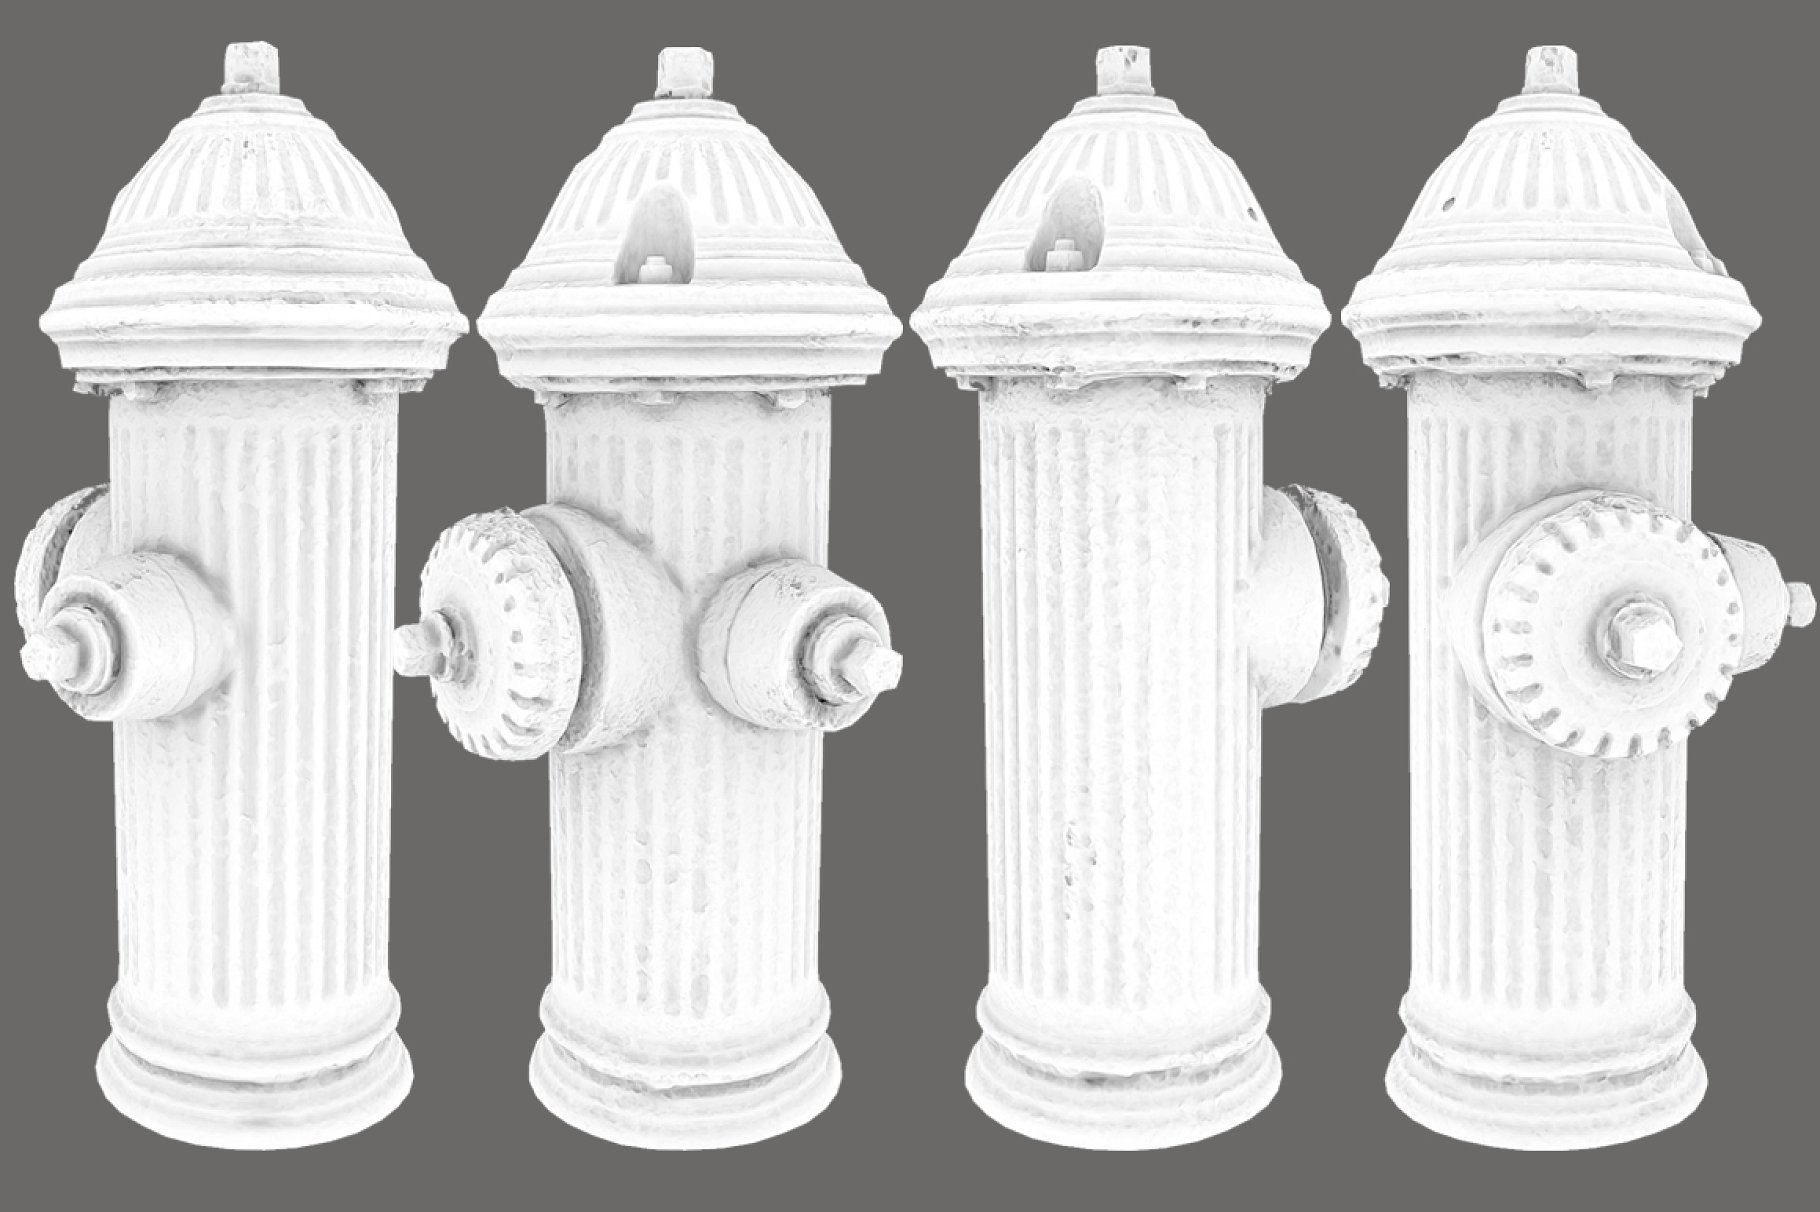 4 white fire hydrant models on a gray background.